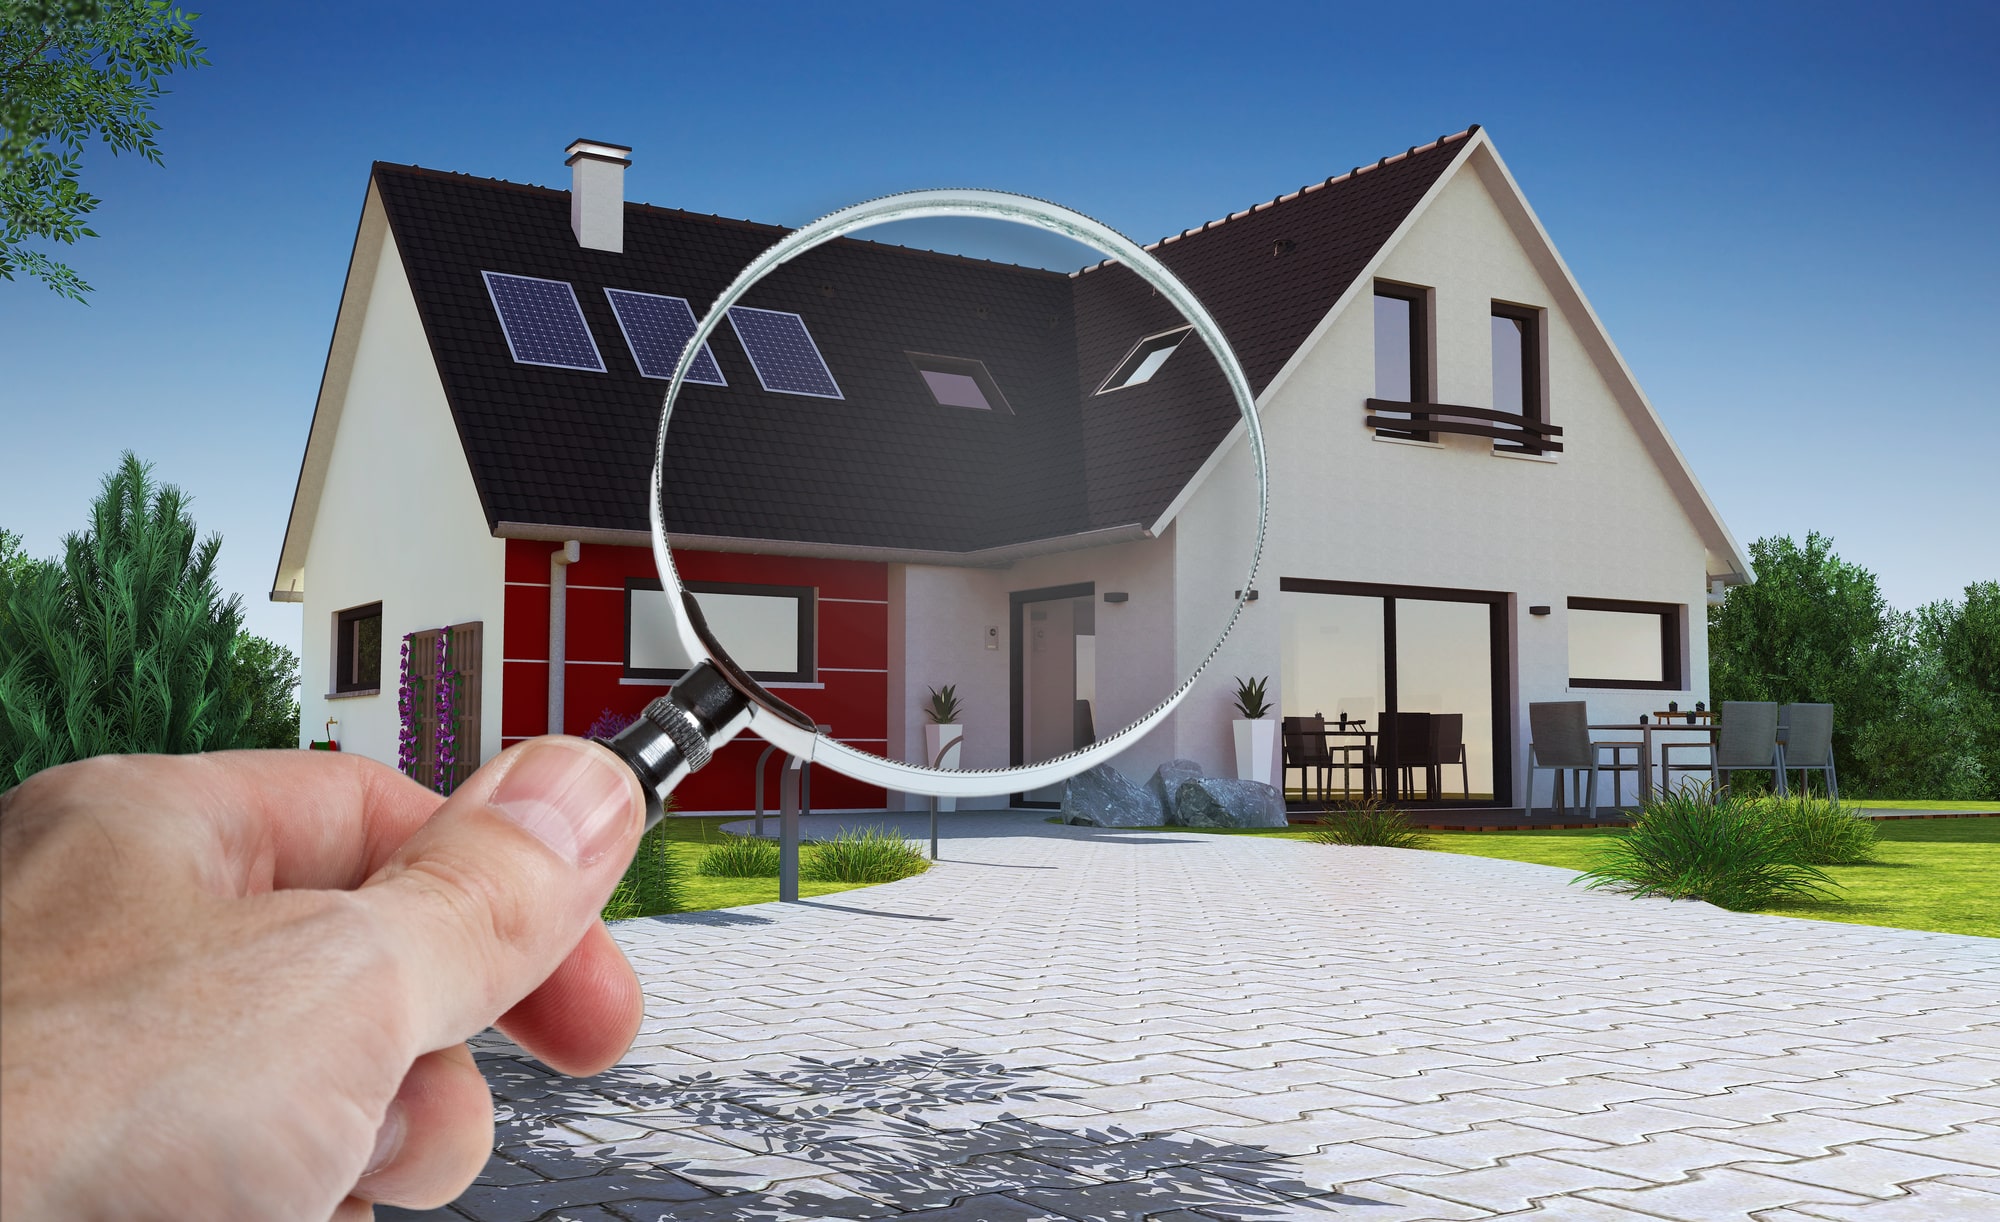 All About Rental Property Inspections in Salt Lake City, UT